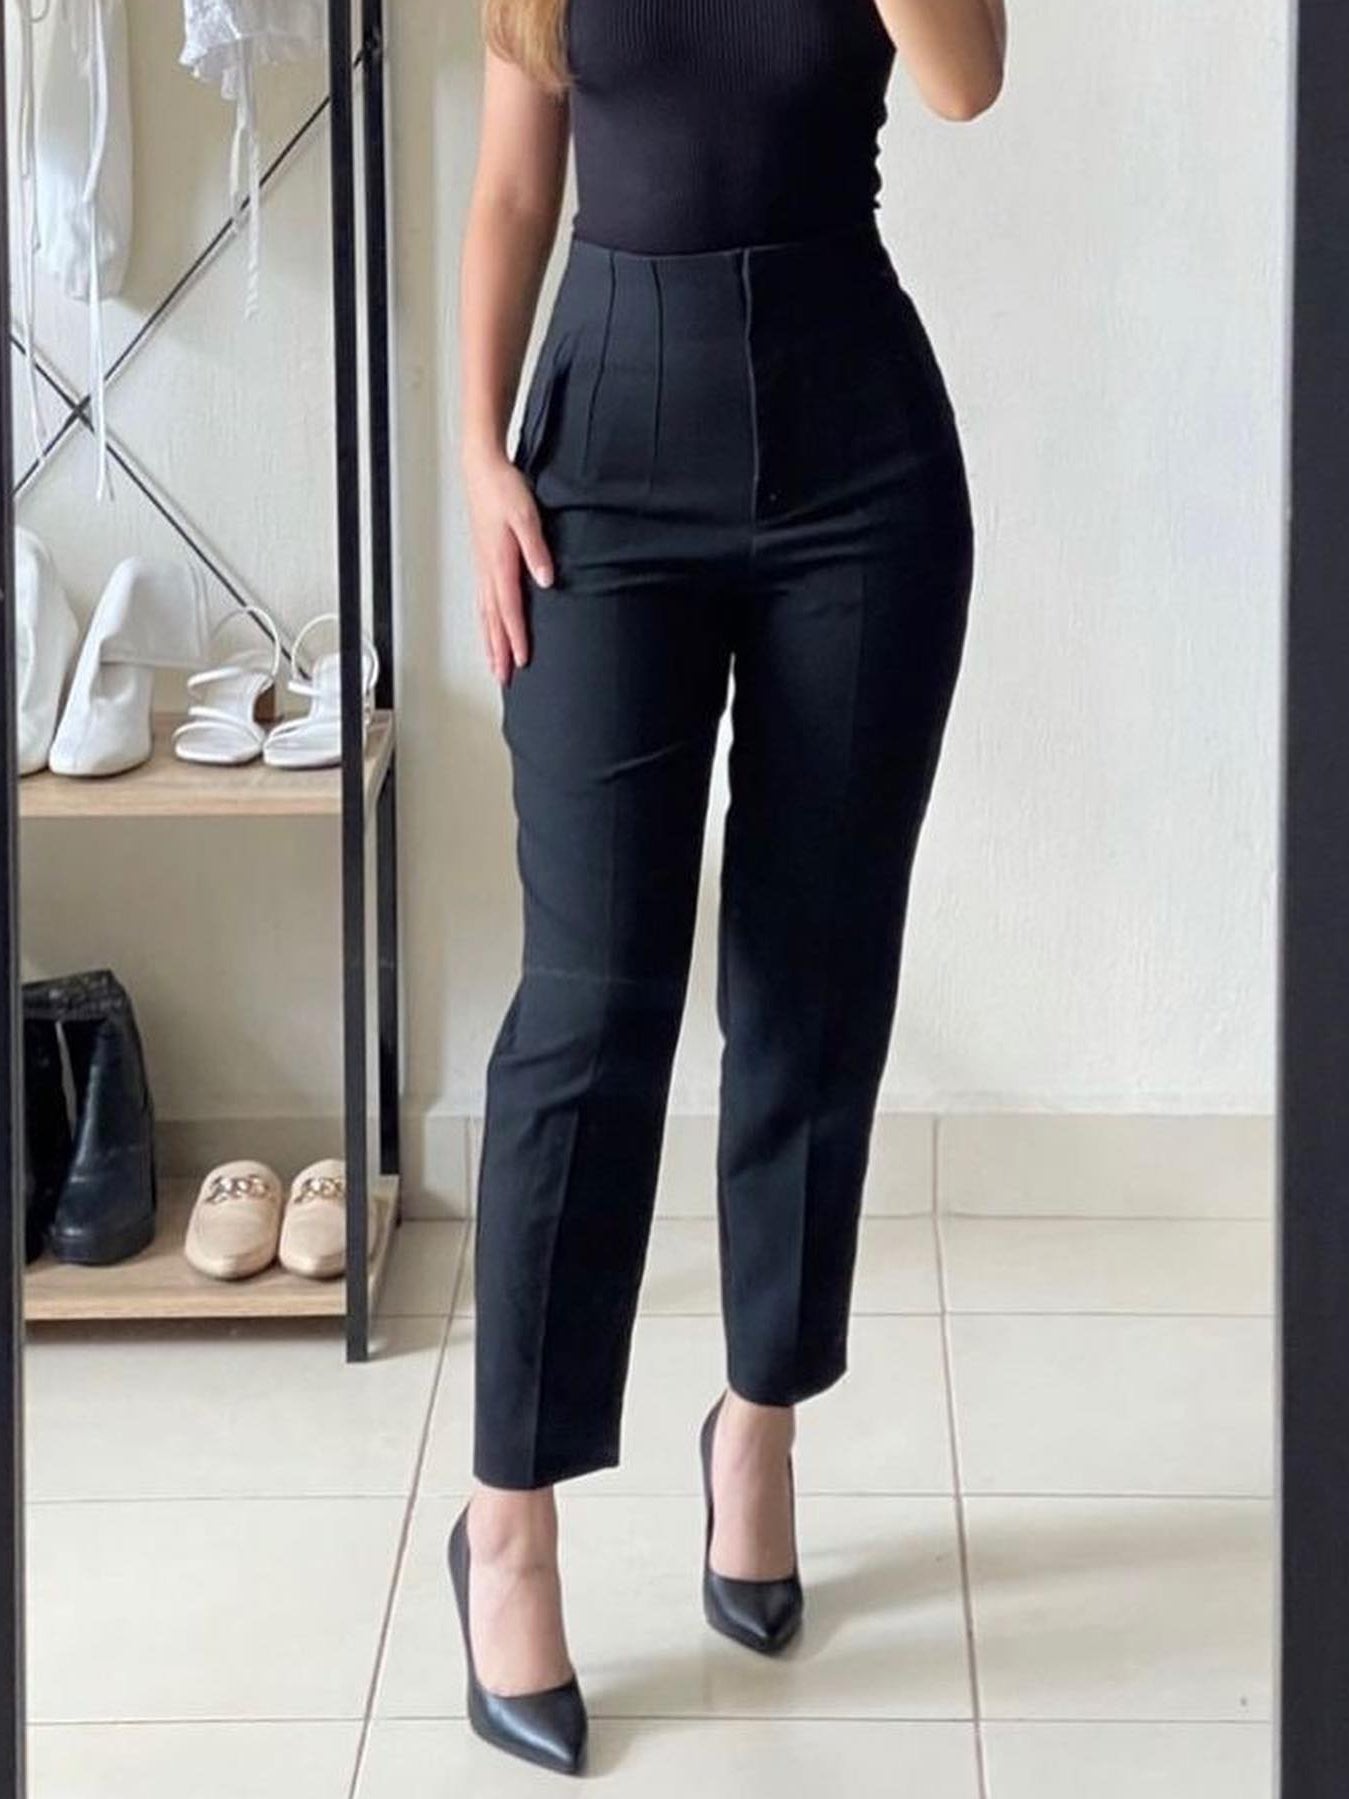 Black Relaxed Fit Pants for Women, High Waist Wide Leg Pants for Women, Black  Pants High Rise, Black Pants Womens - Etsy